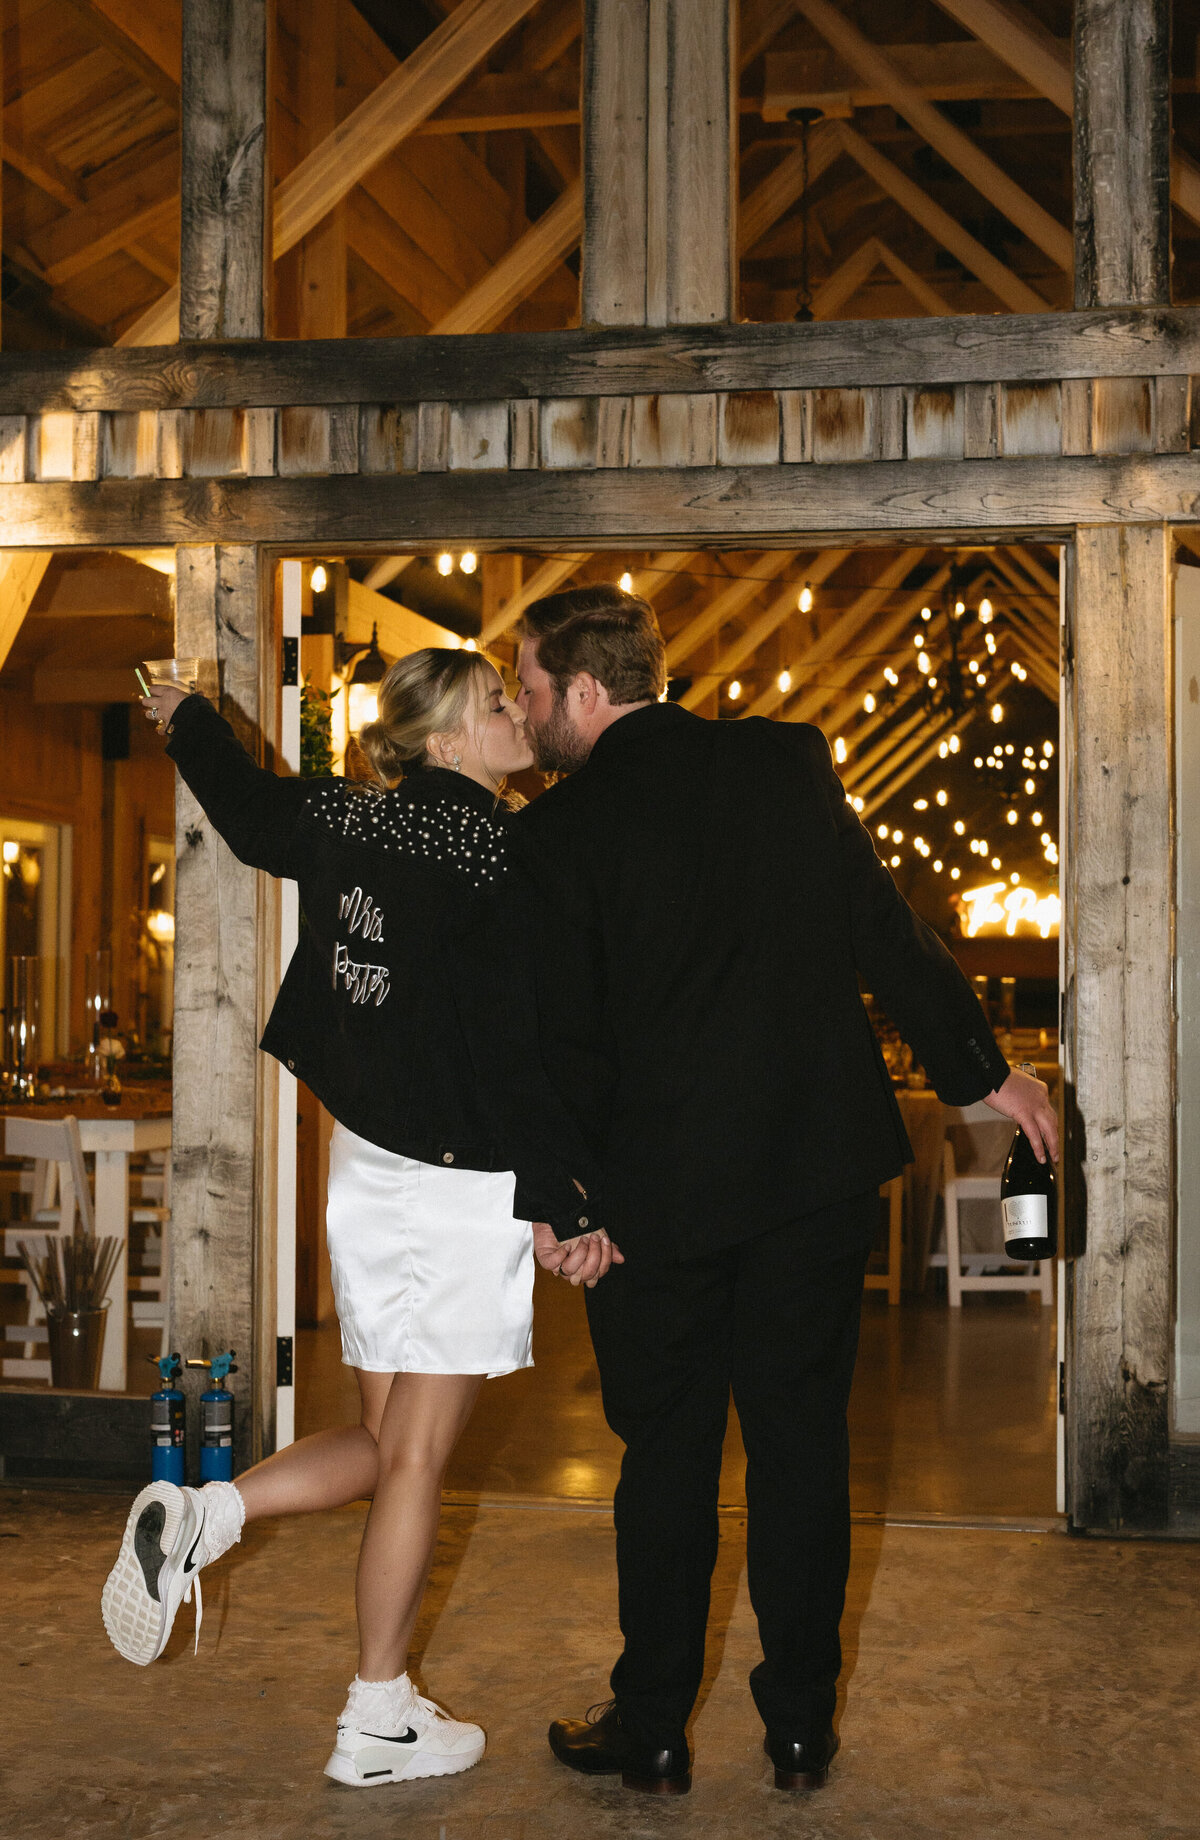 wedding reception in a barn with over head beams covered in fairy lights to create a romantic ambiance as the bride and groom hold hands and walk into their reception with their arms in the air